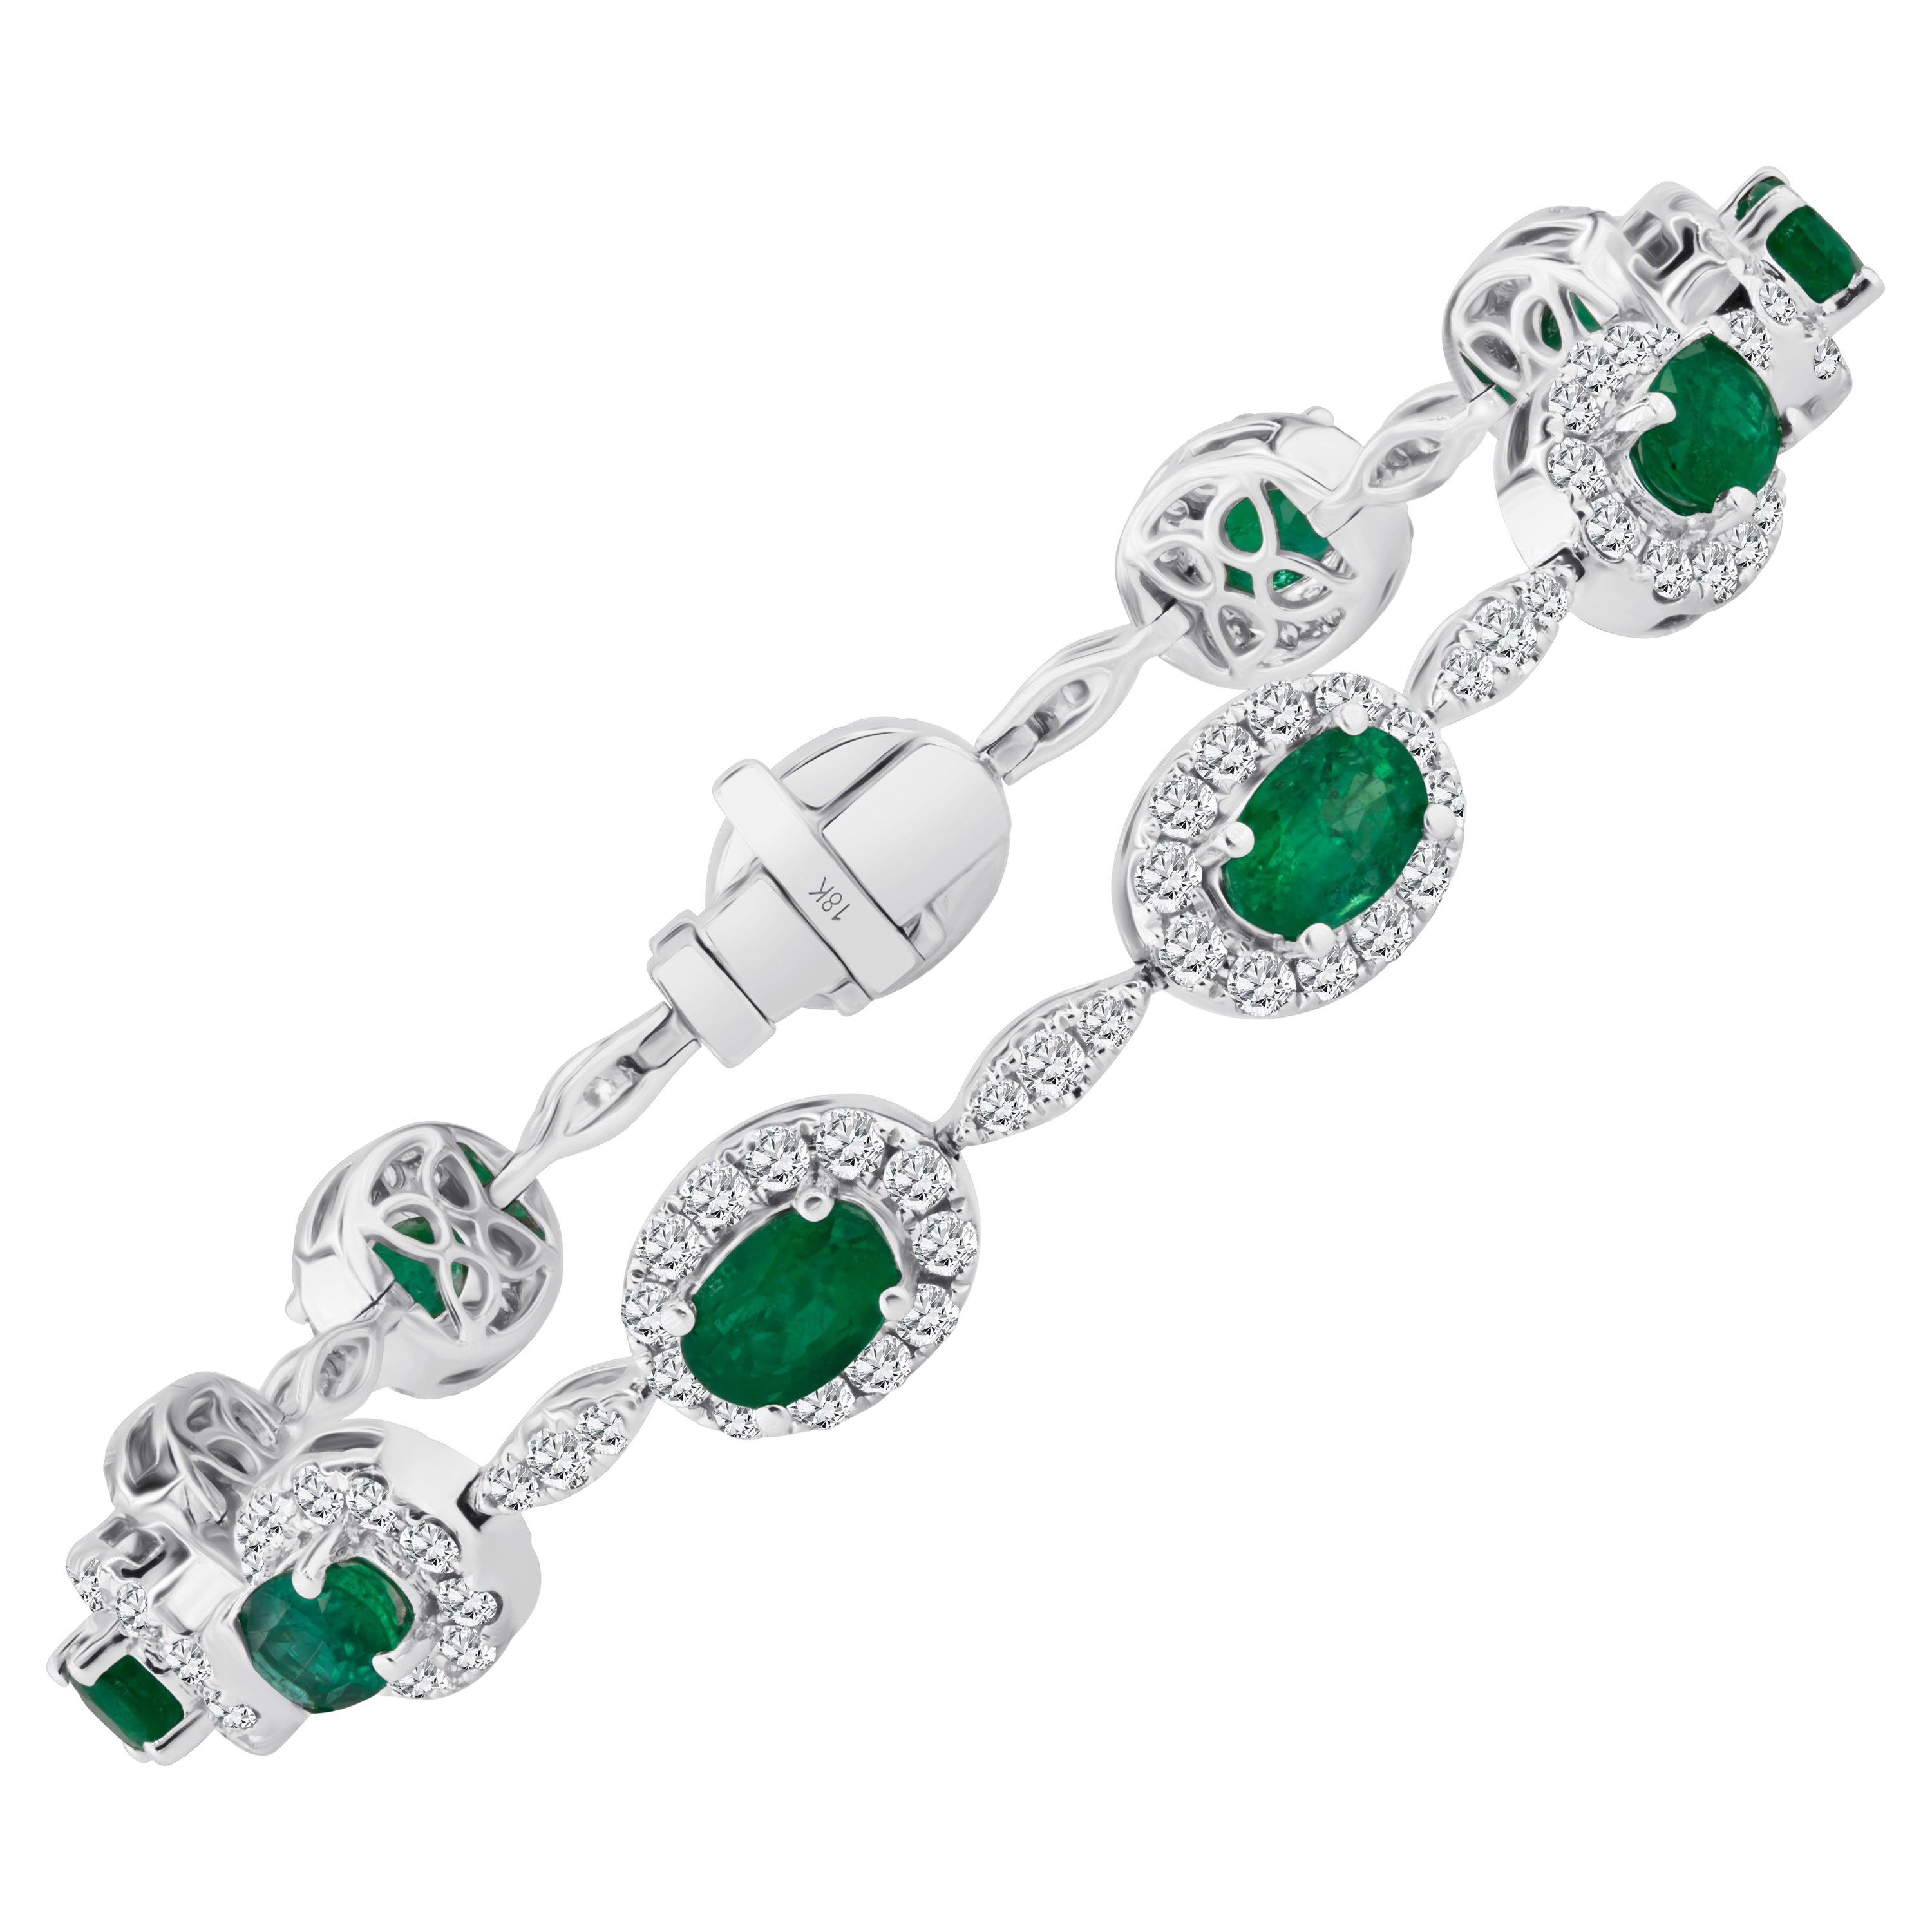 4.63 Carat Oval Cut Emerald and Natural Diamond Bracelet 18K White Gold ref460 For Sale